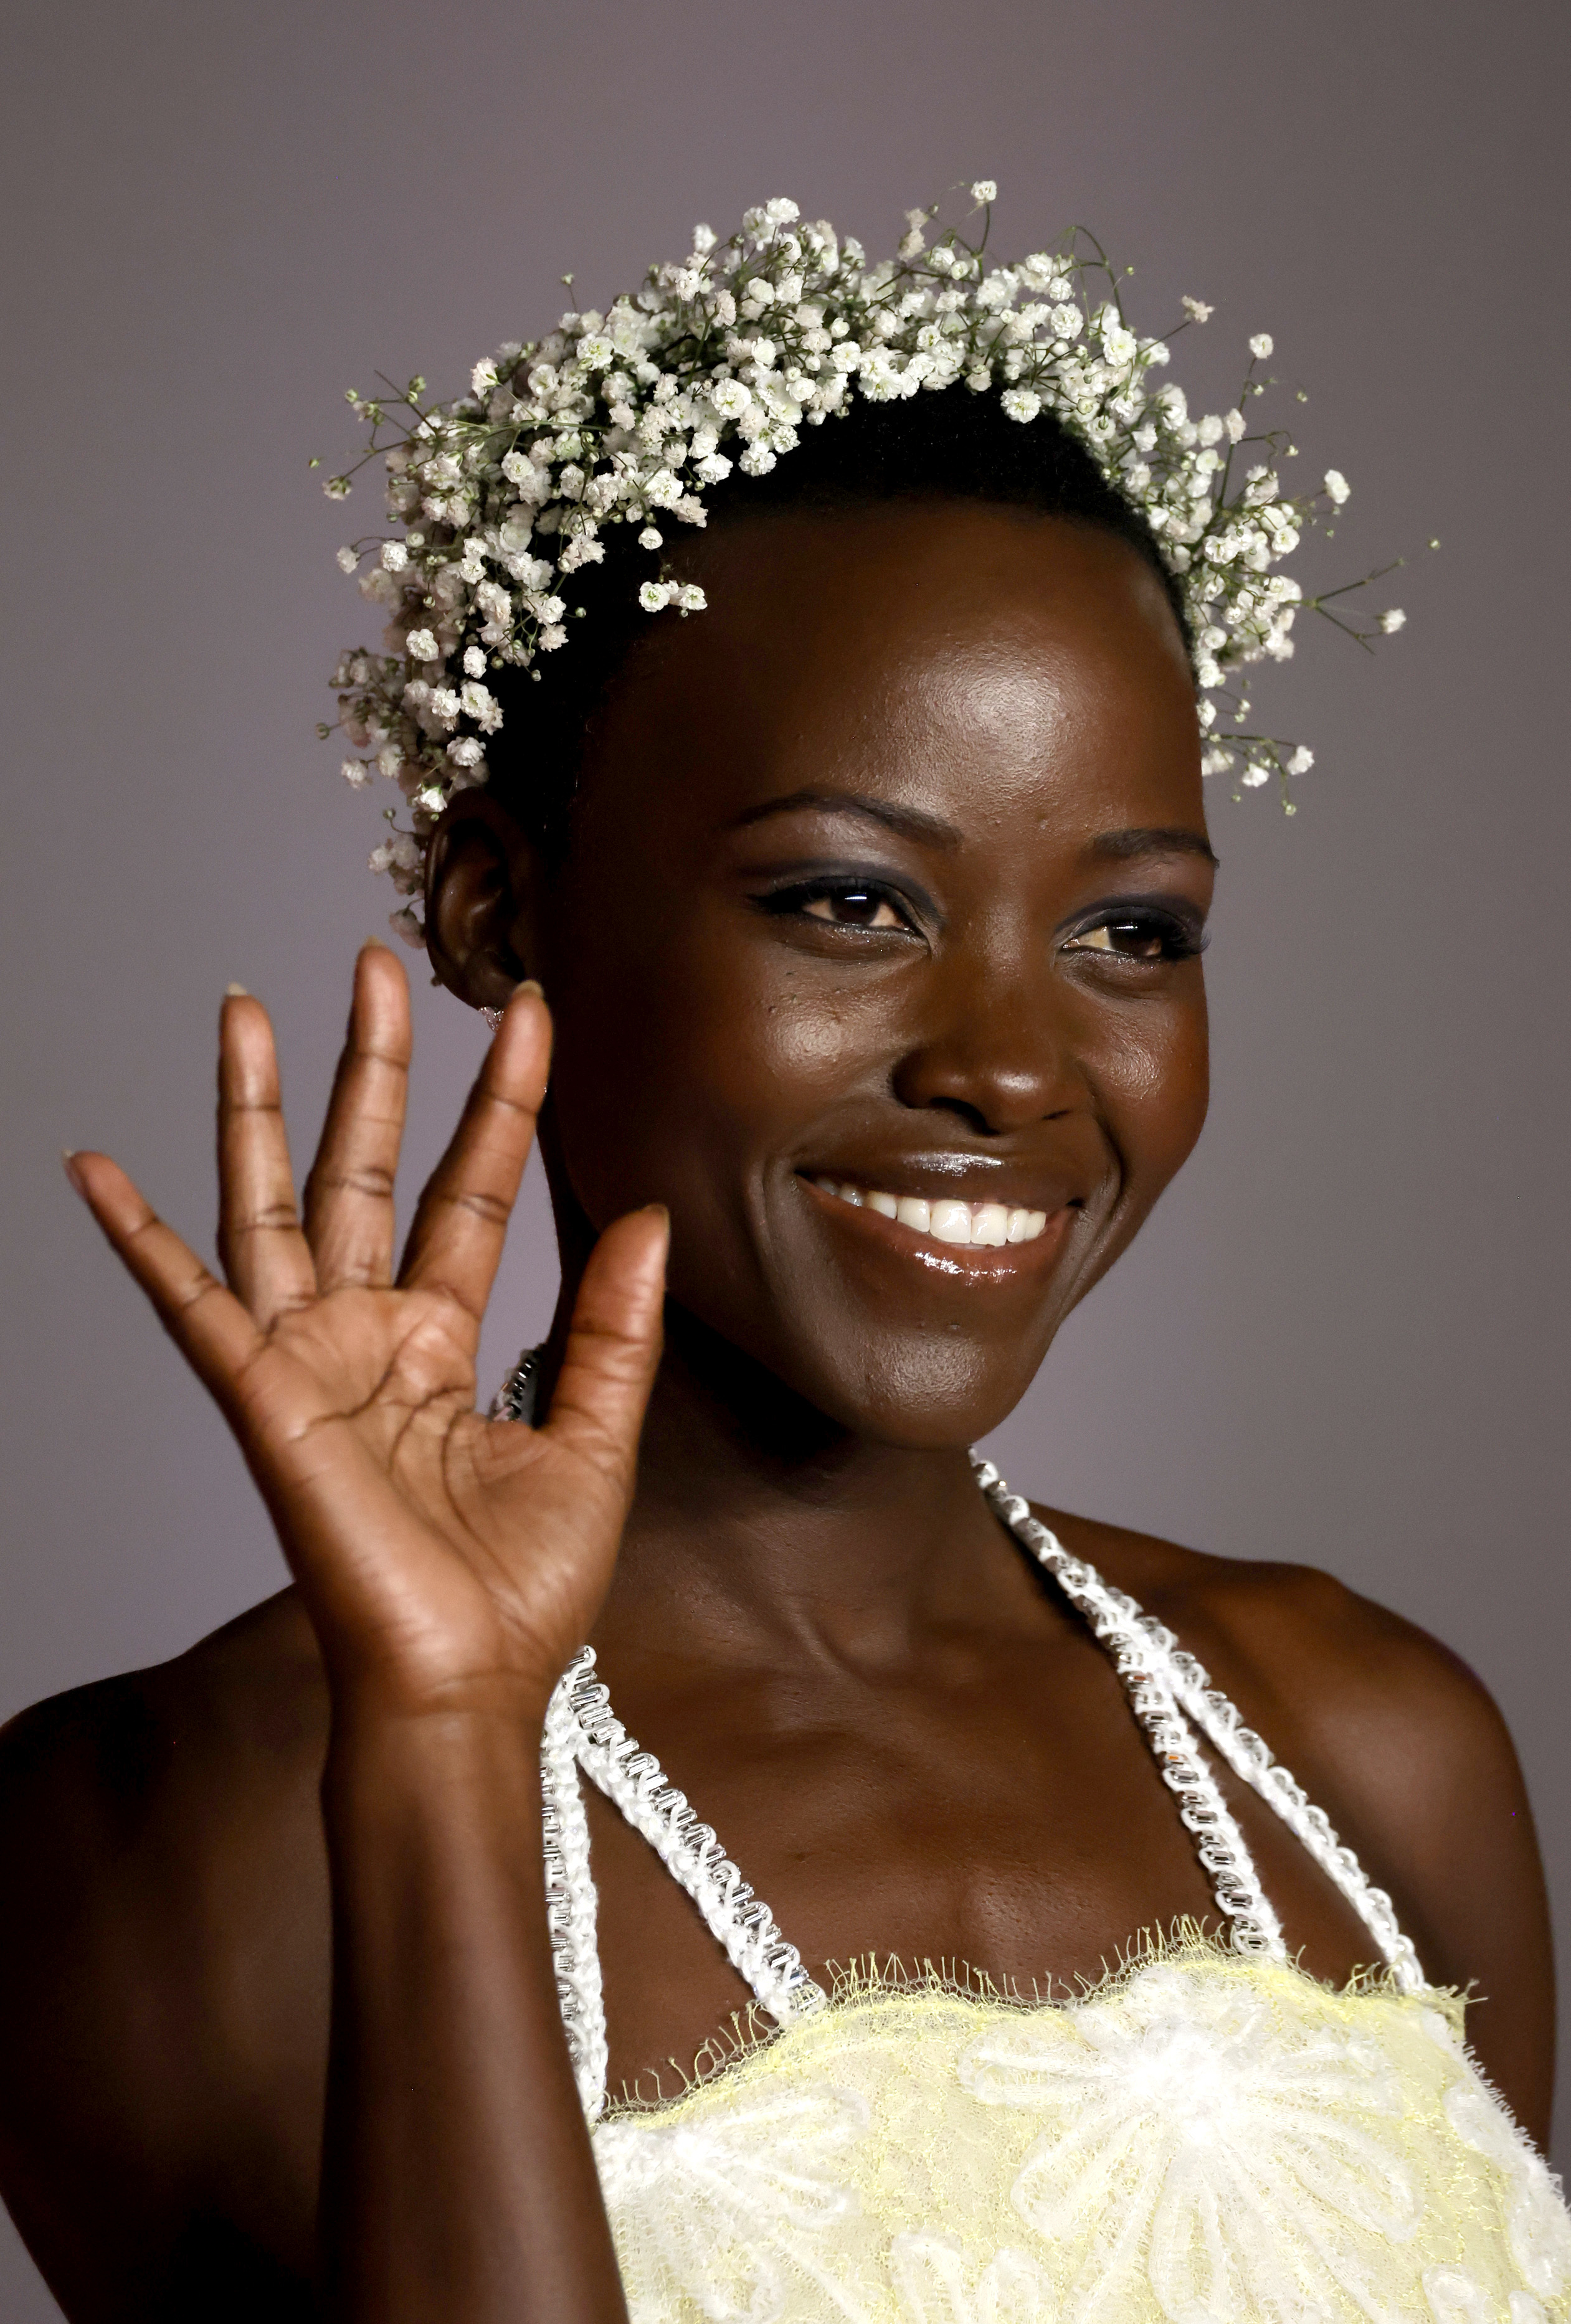 Lupita Nyong&#x27;o smiles, waves in a floral headdress and embellished dress